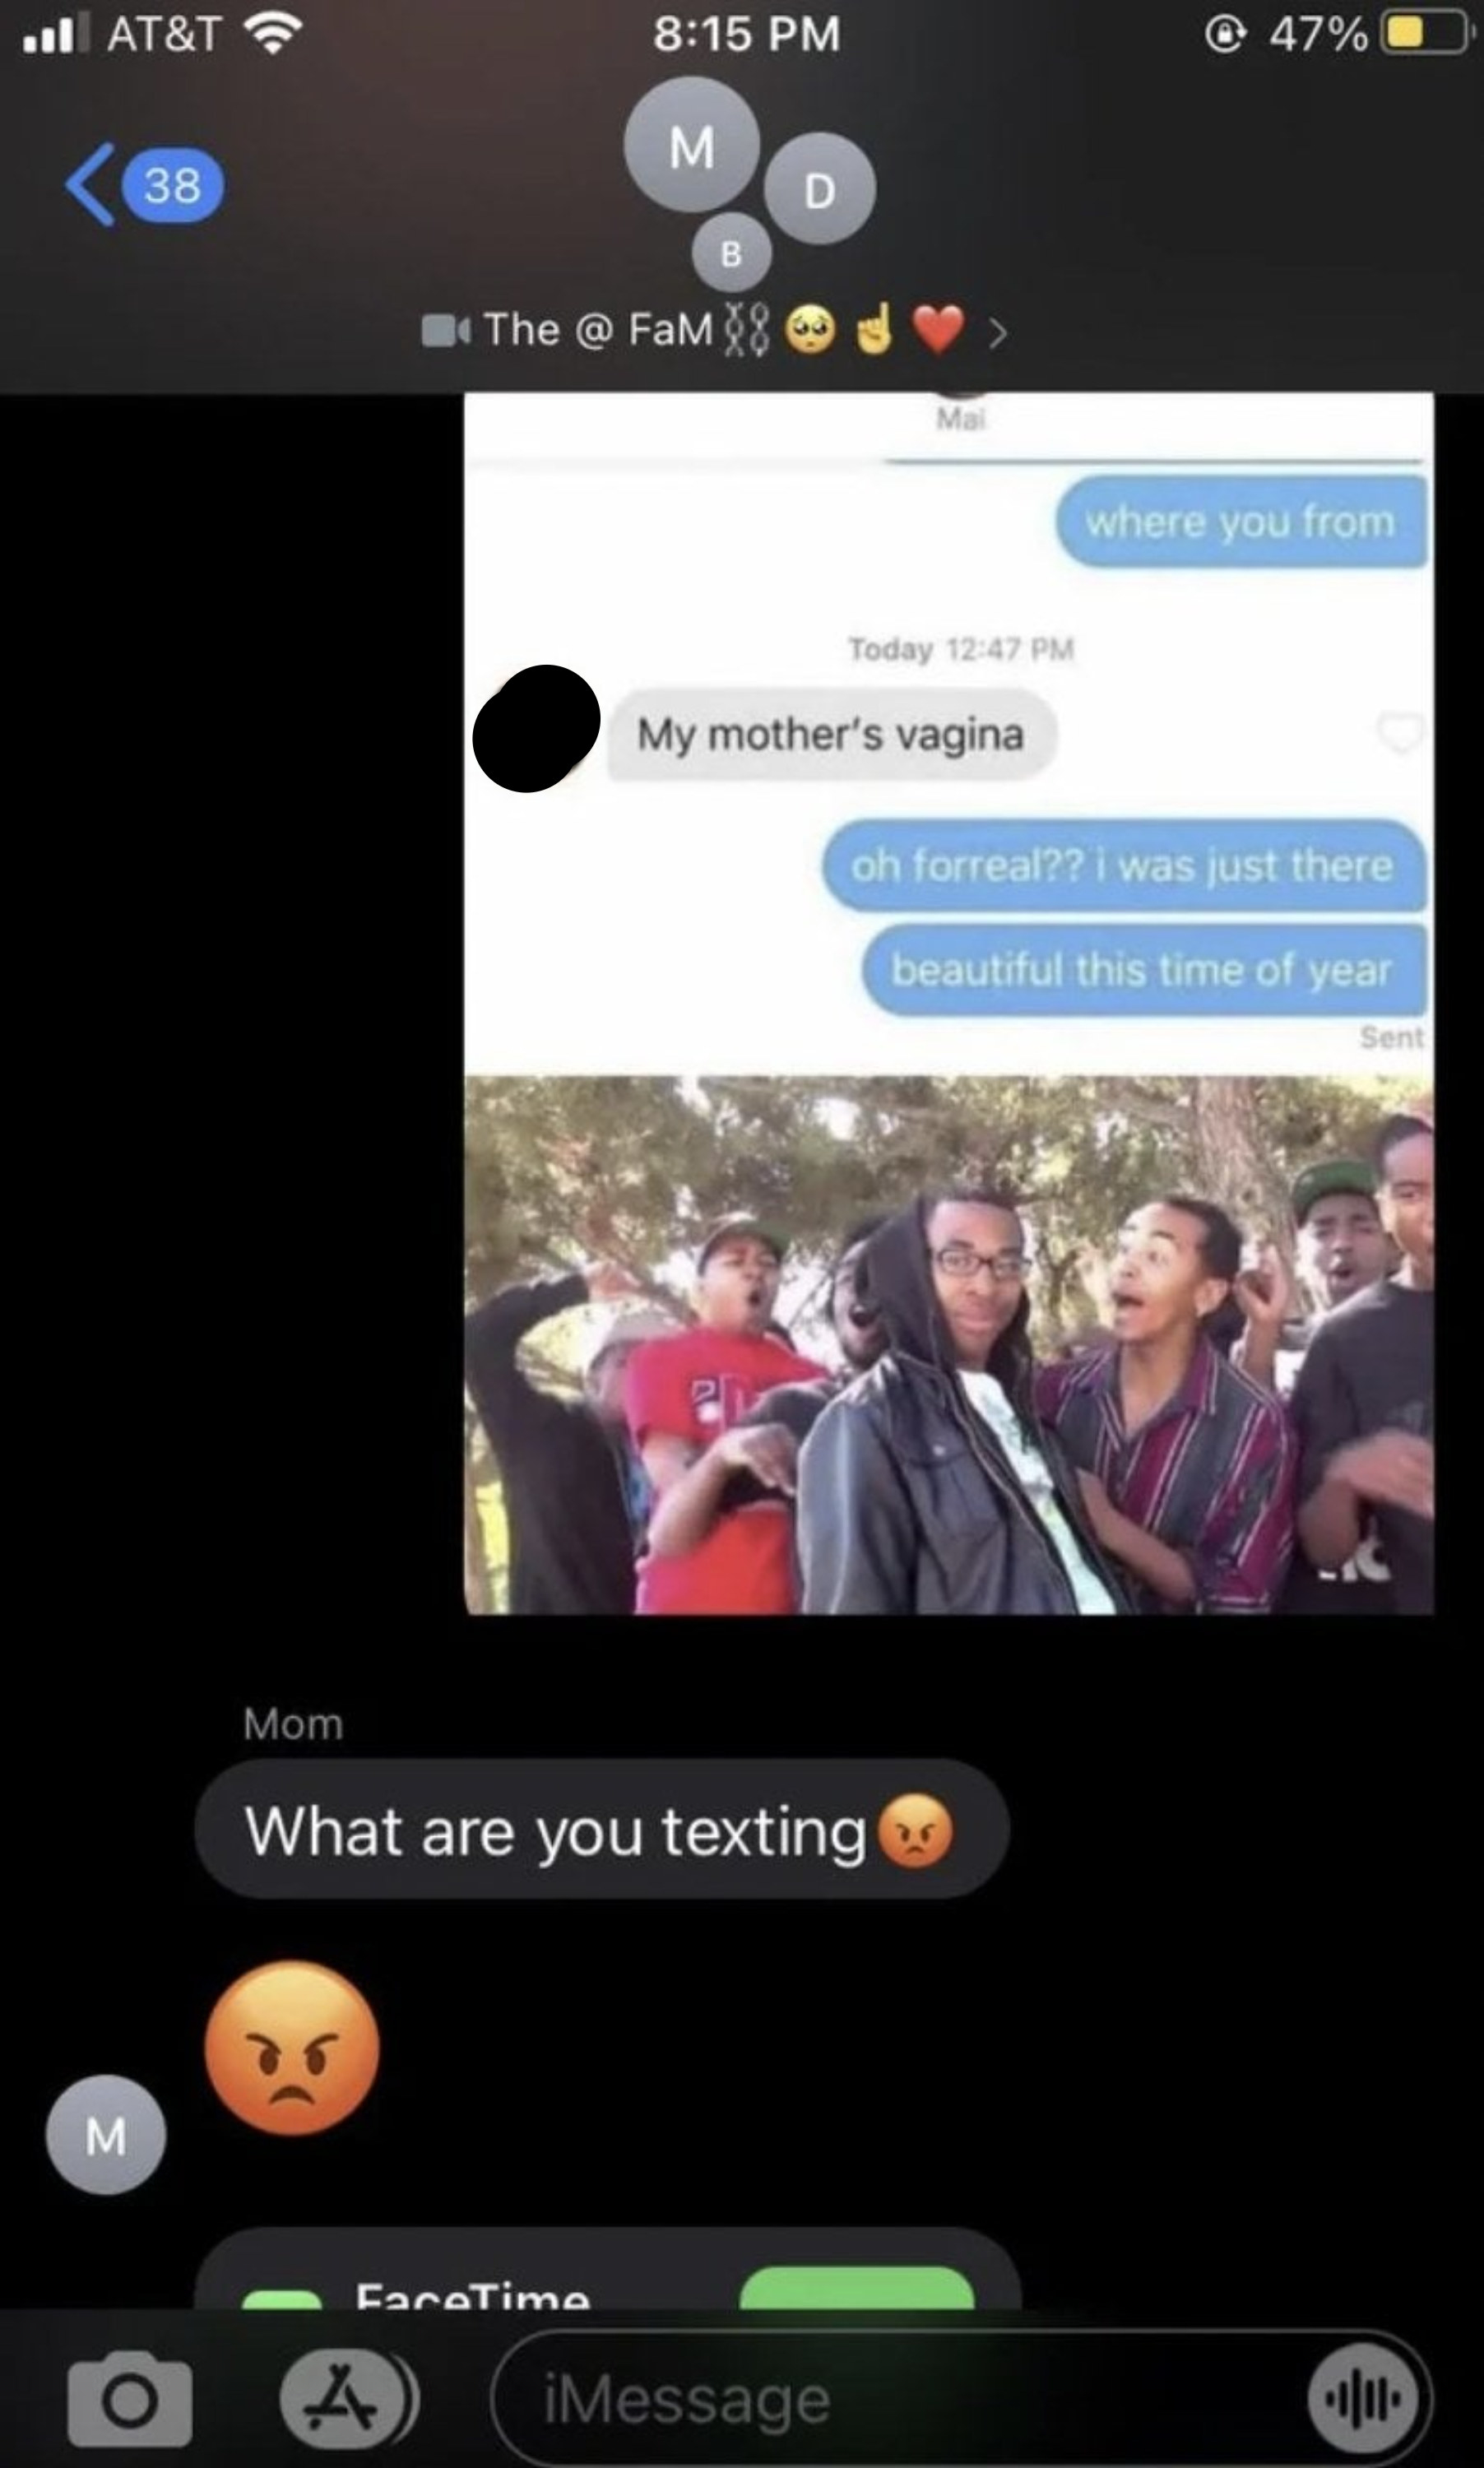 son sends inappropriate meme to family group chat